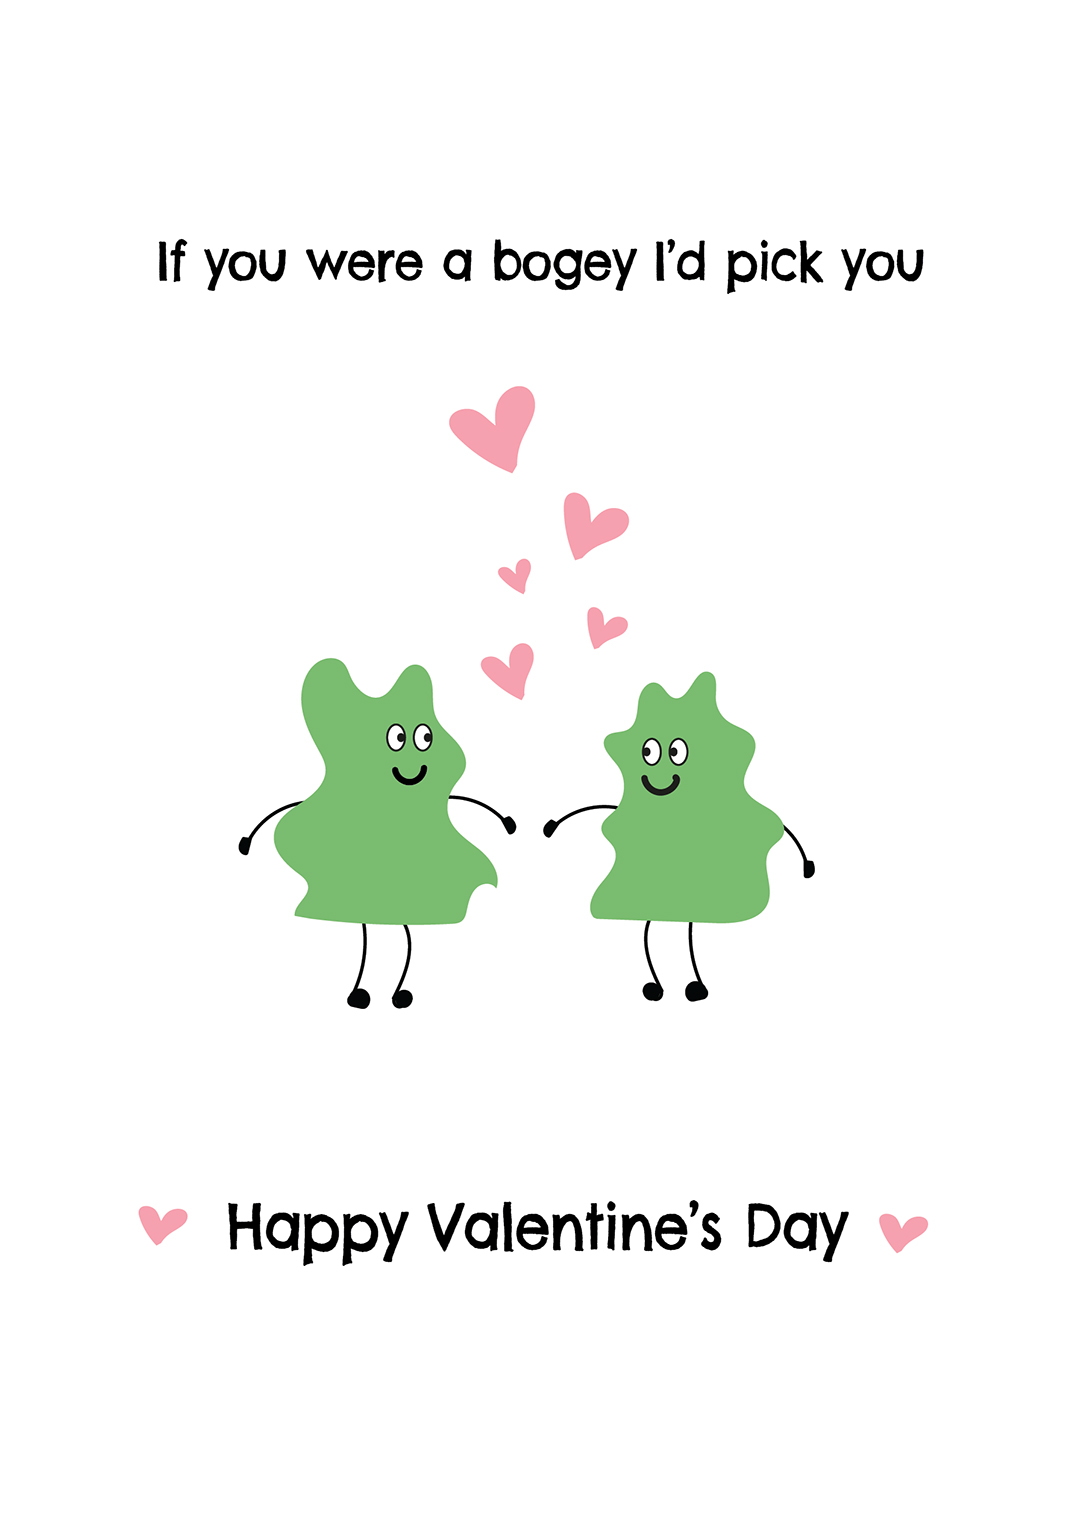 If You Were A Bogey I'd Pick You - Valentine's Day Card